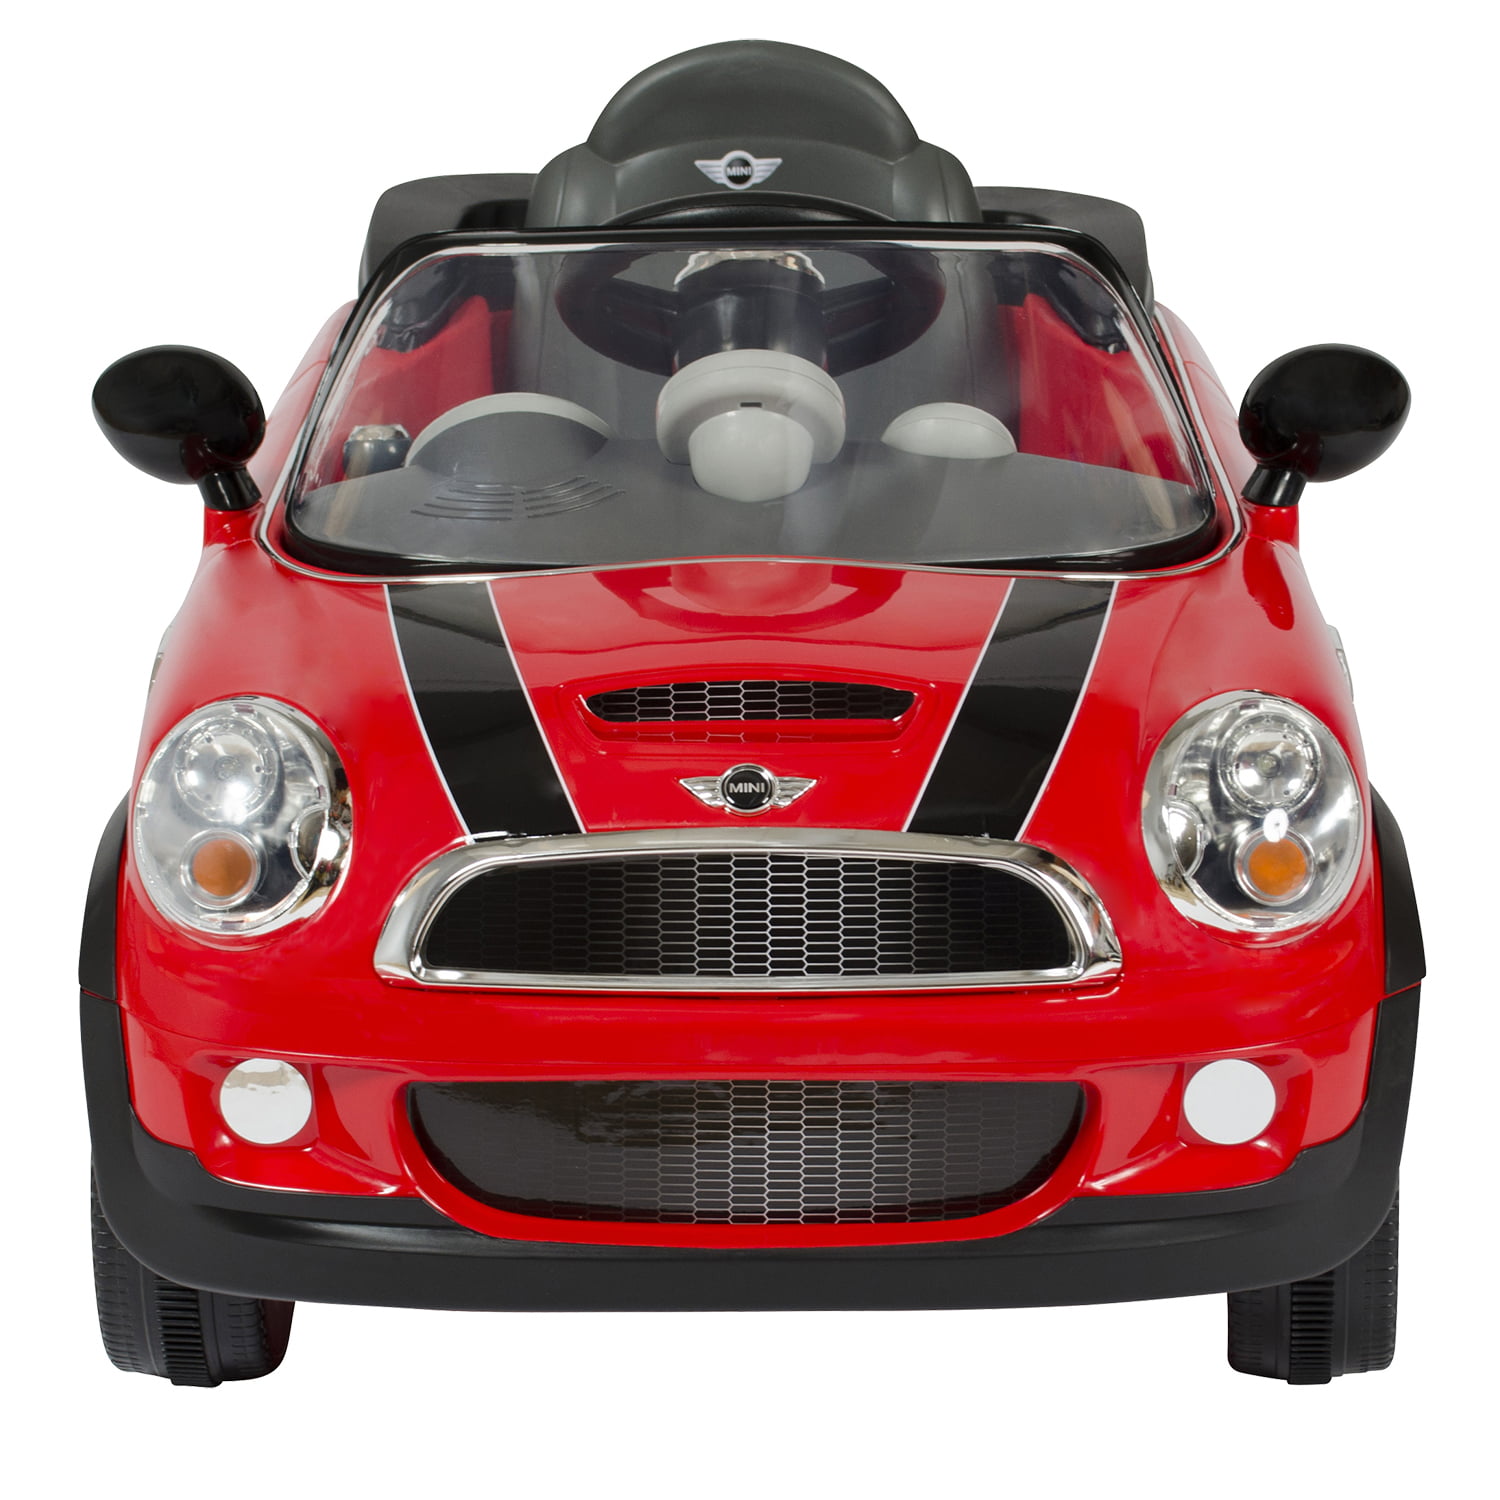 DRIVING A MINI RED CAR!! Electric Toy Car for Kids 